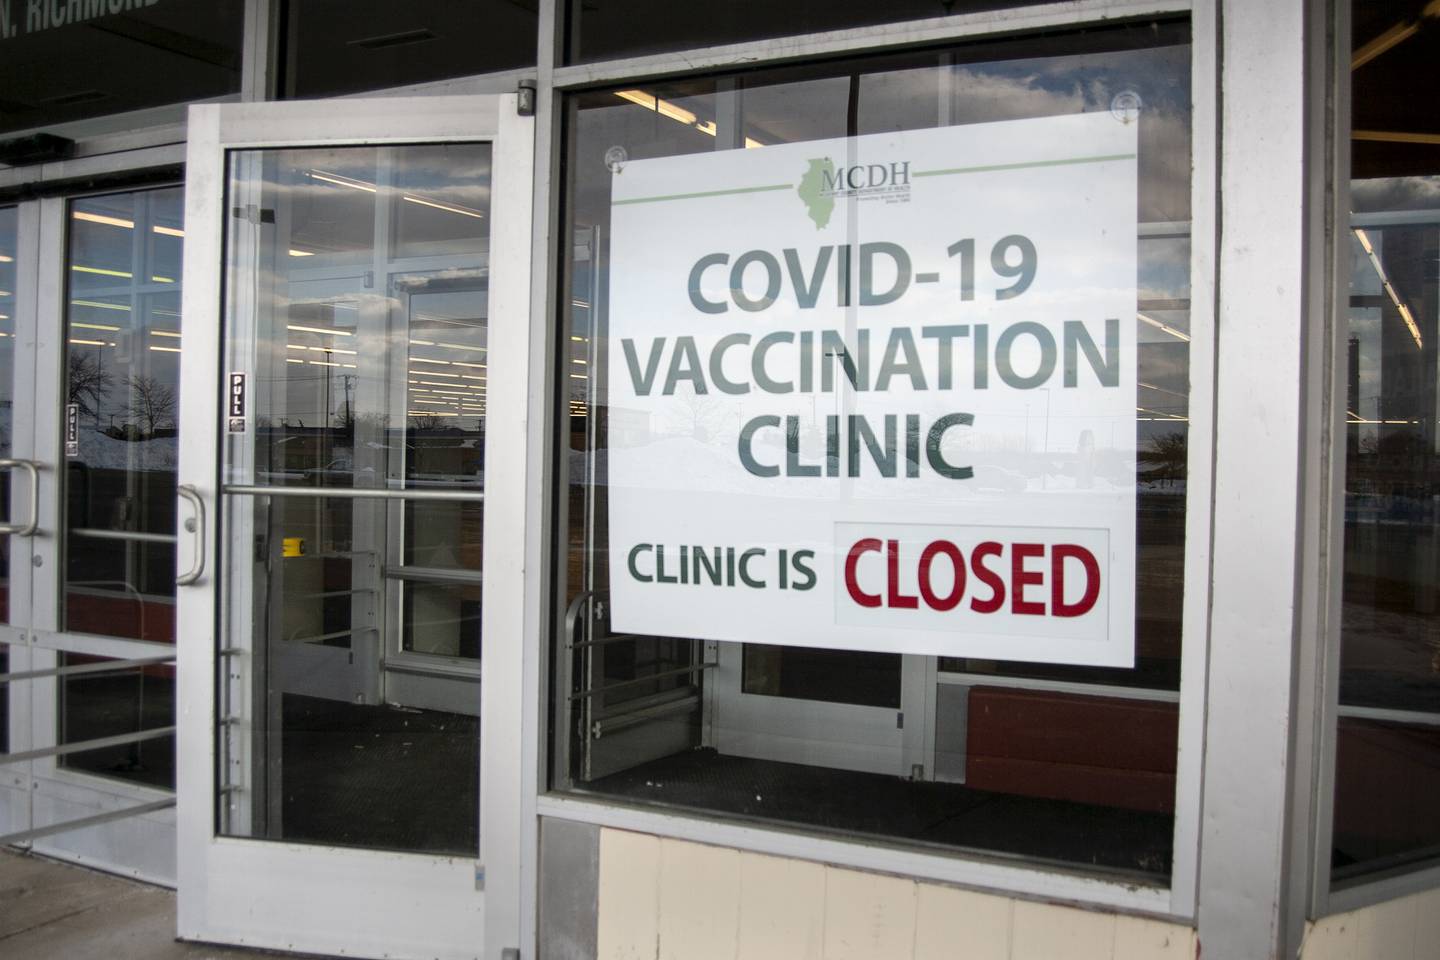 McHenry city officials were in the process Thursday of transforming the former Kmart at 1900 N. Richmond Road into a mass vaccination site.